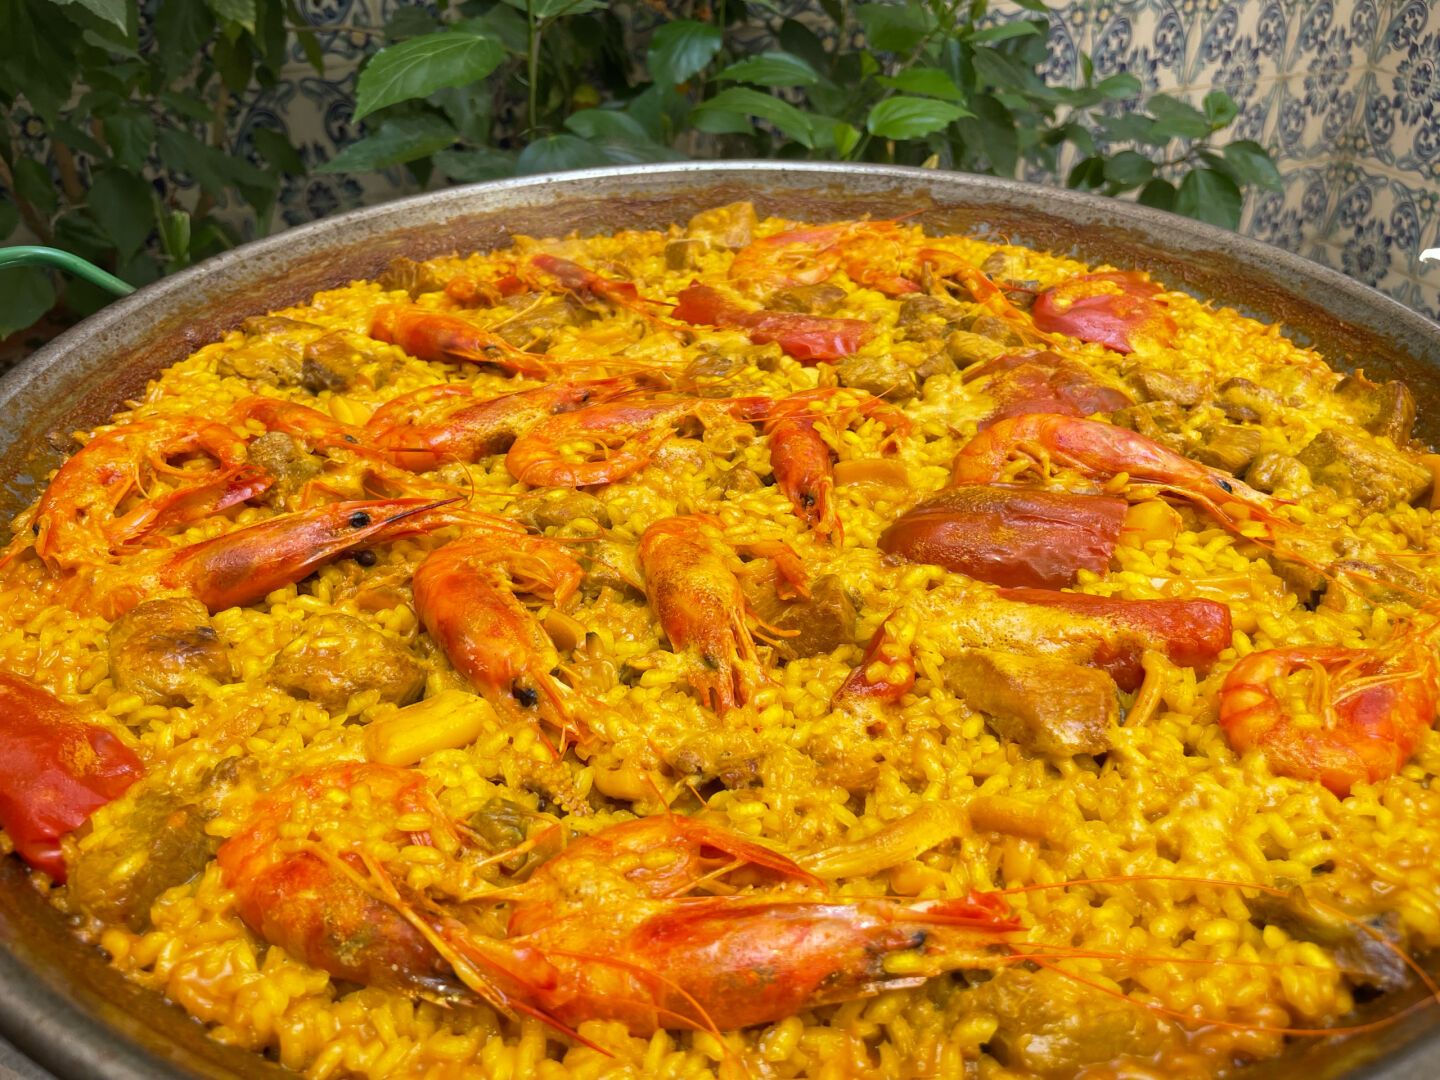 In the photo you can see a seafood paella almost cooked. The rice has an intense yellow color and you can see shrimp and tuna on it.